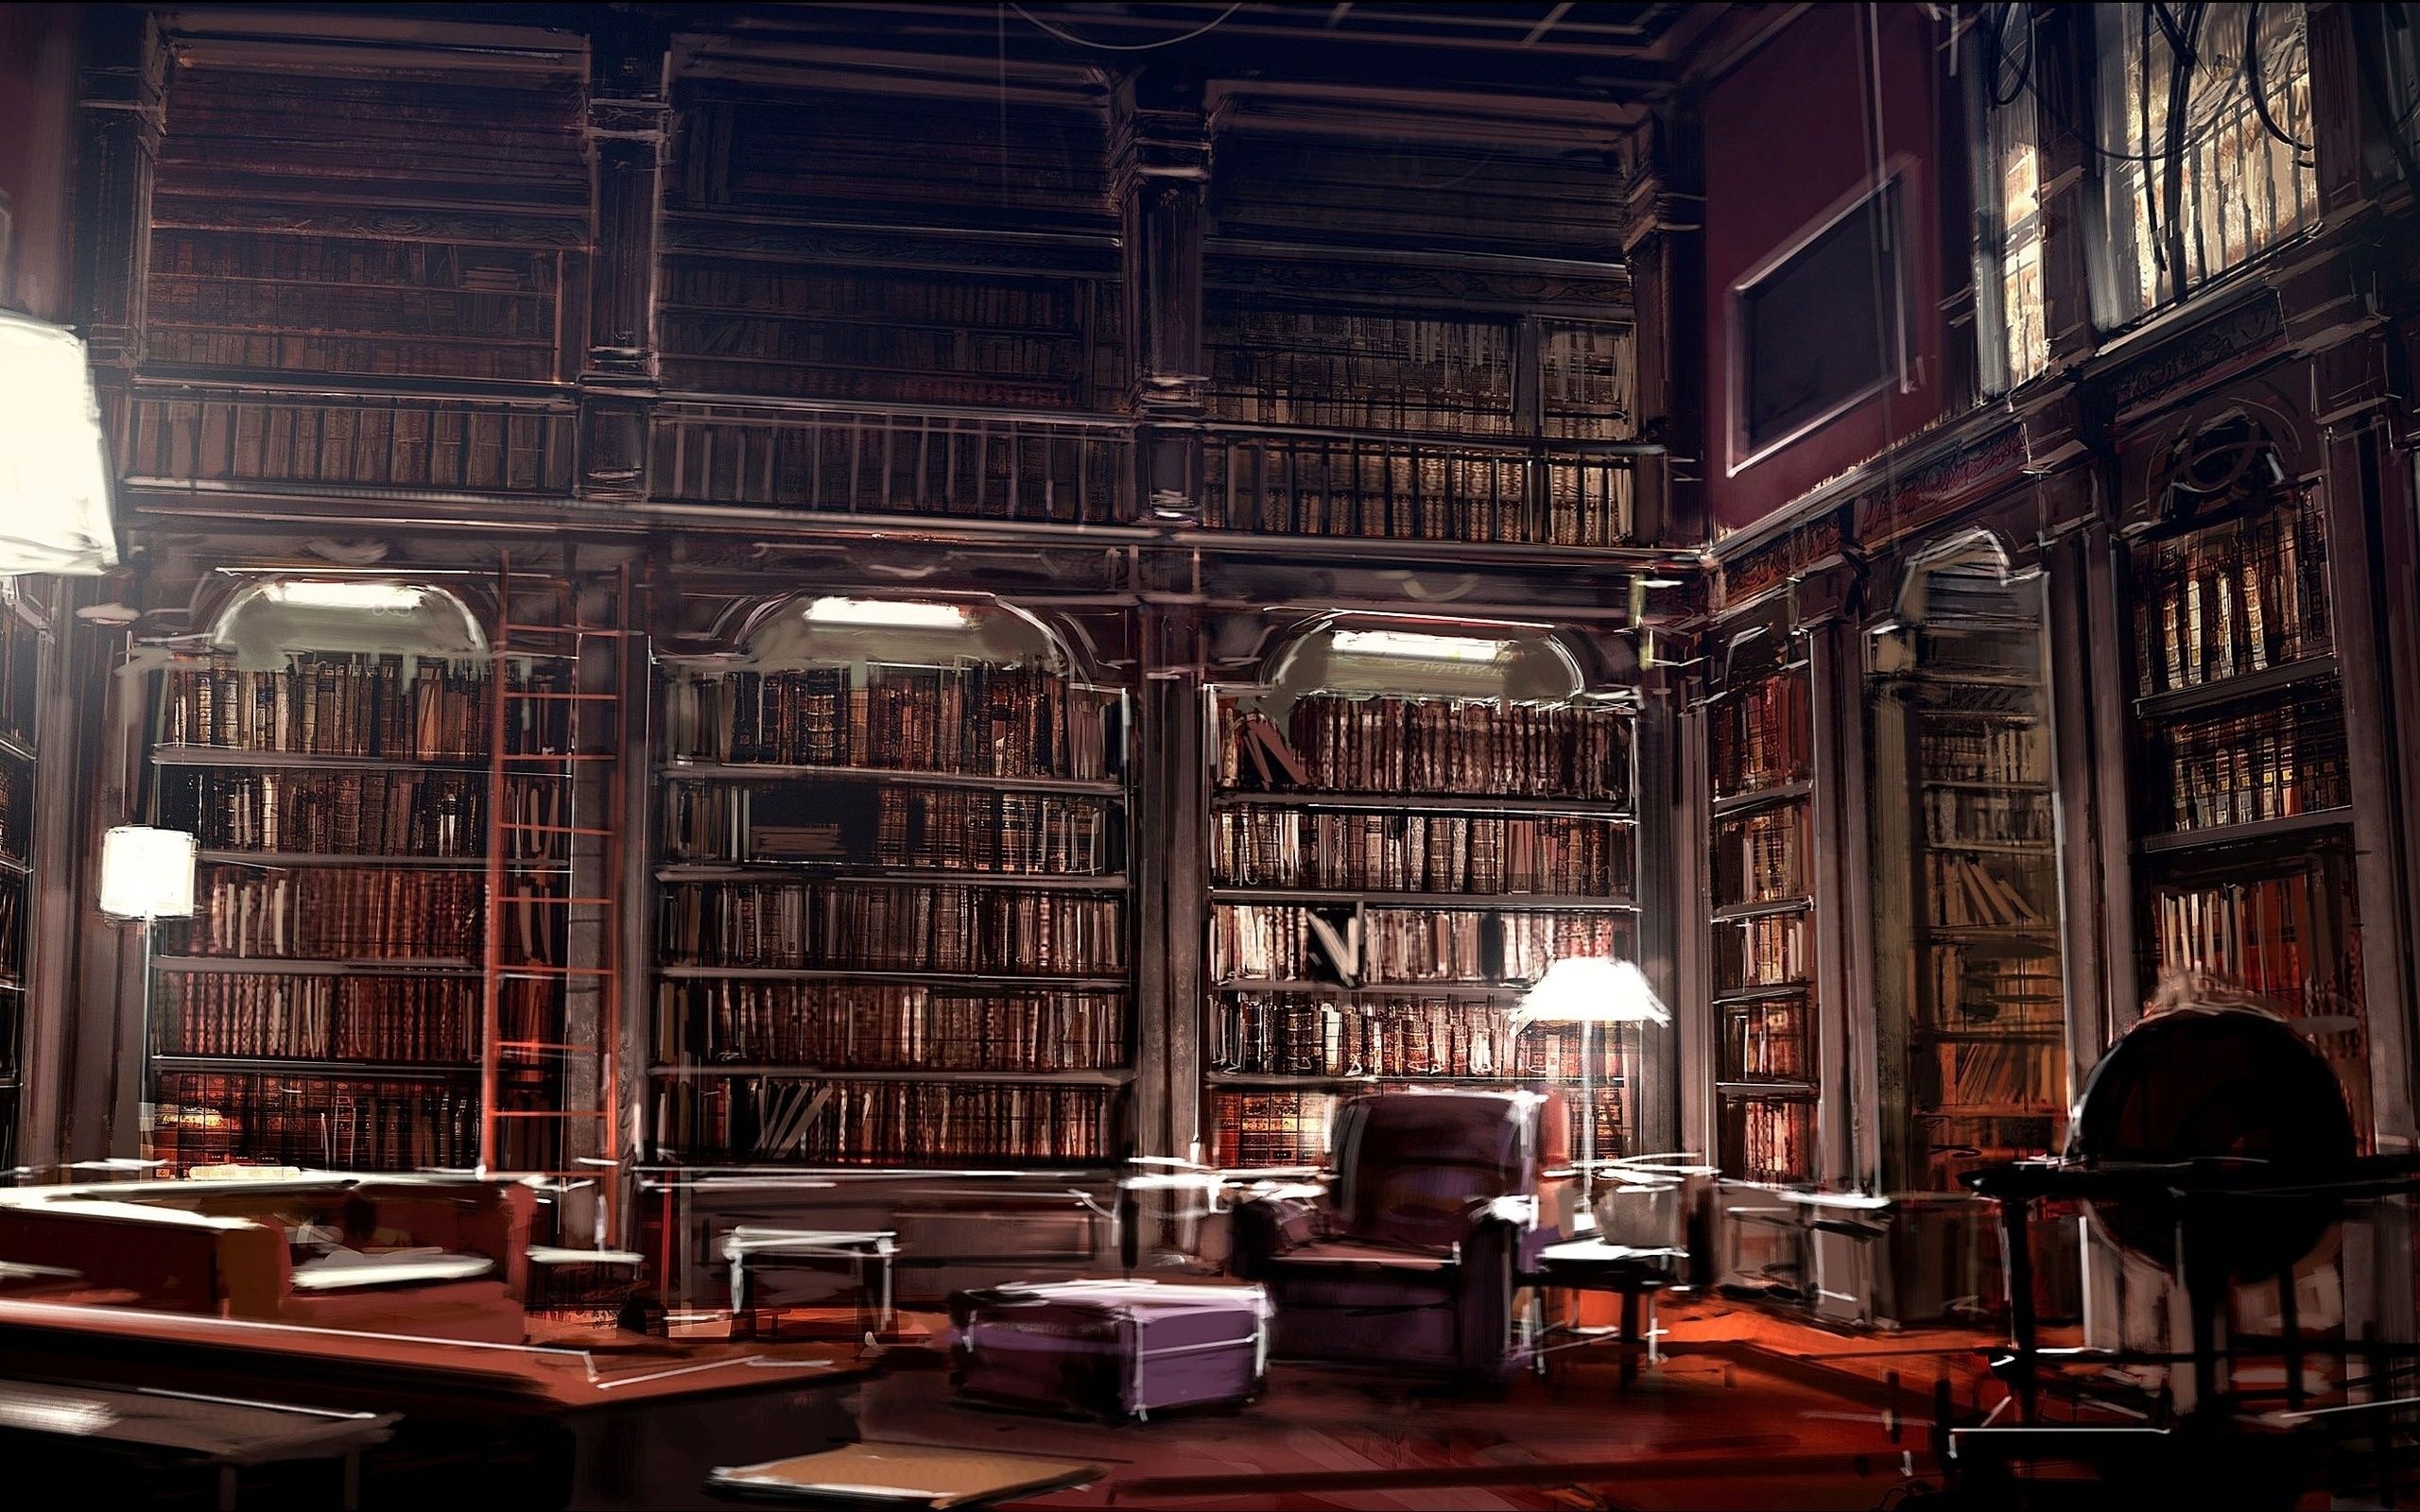 4K library wallpapers, High-definition images, Grandeur of libraries, Scholarly atmosphere, 2560x1600 HD Desktop